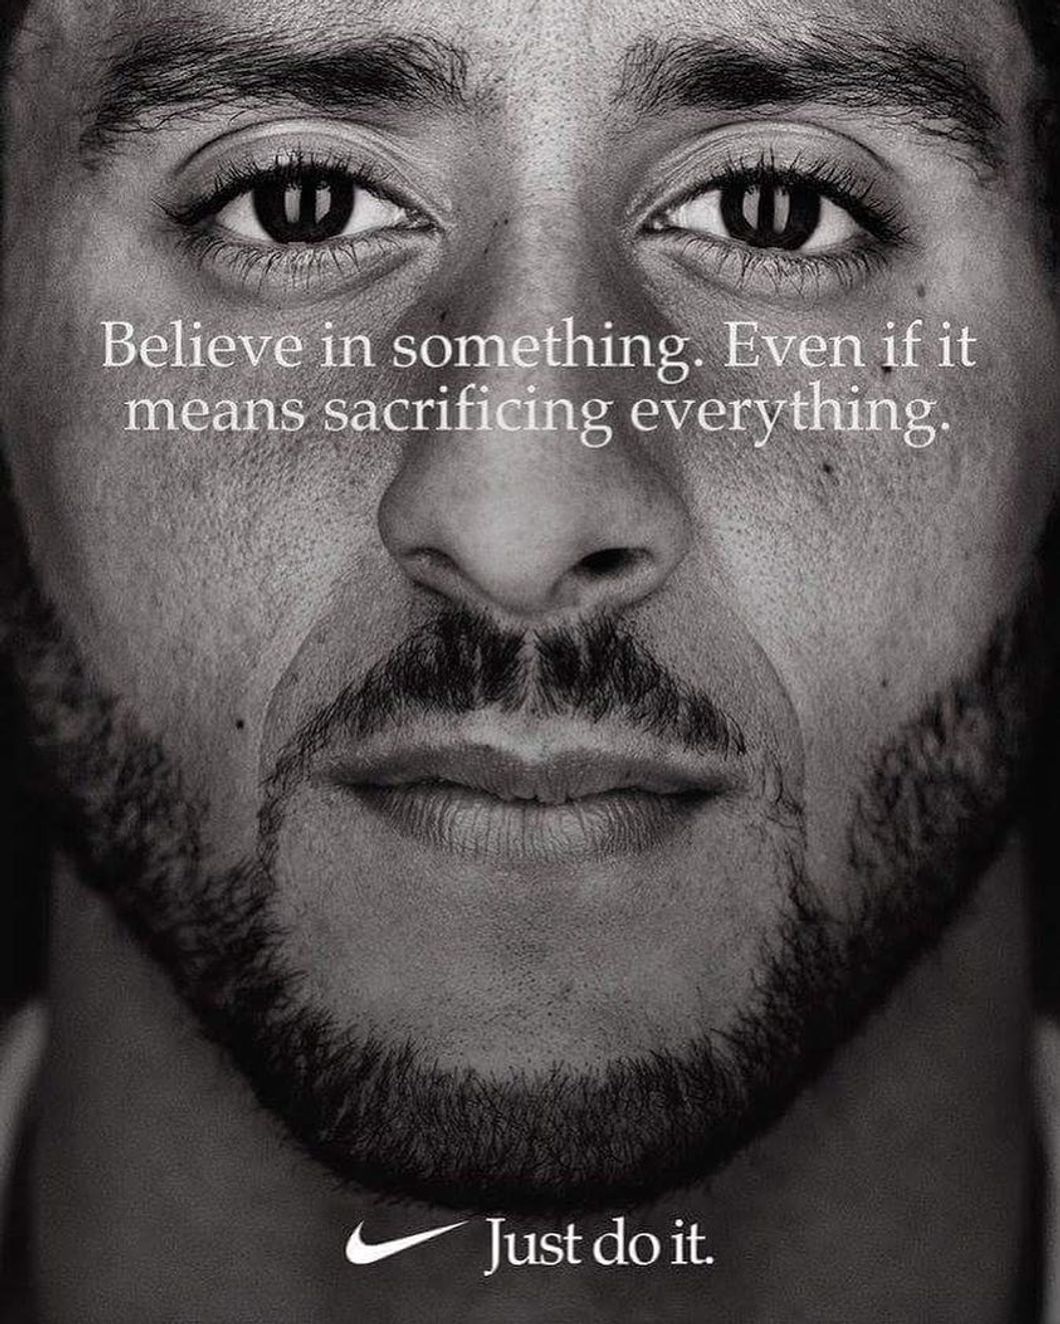 Nike's Latest Campaign Starring Colin Kaepernick Provokes People With Its Bold Statement